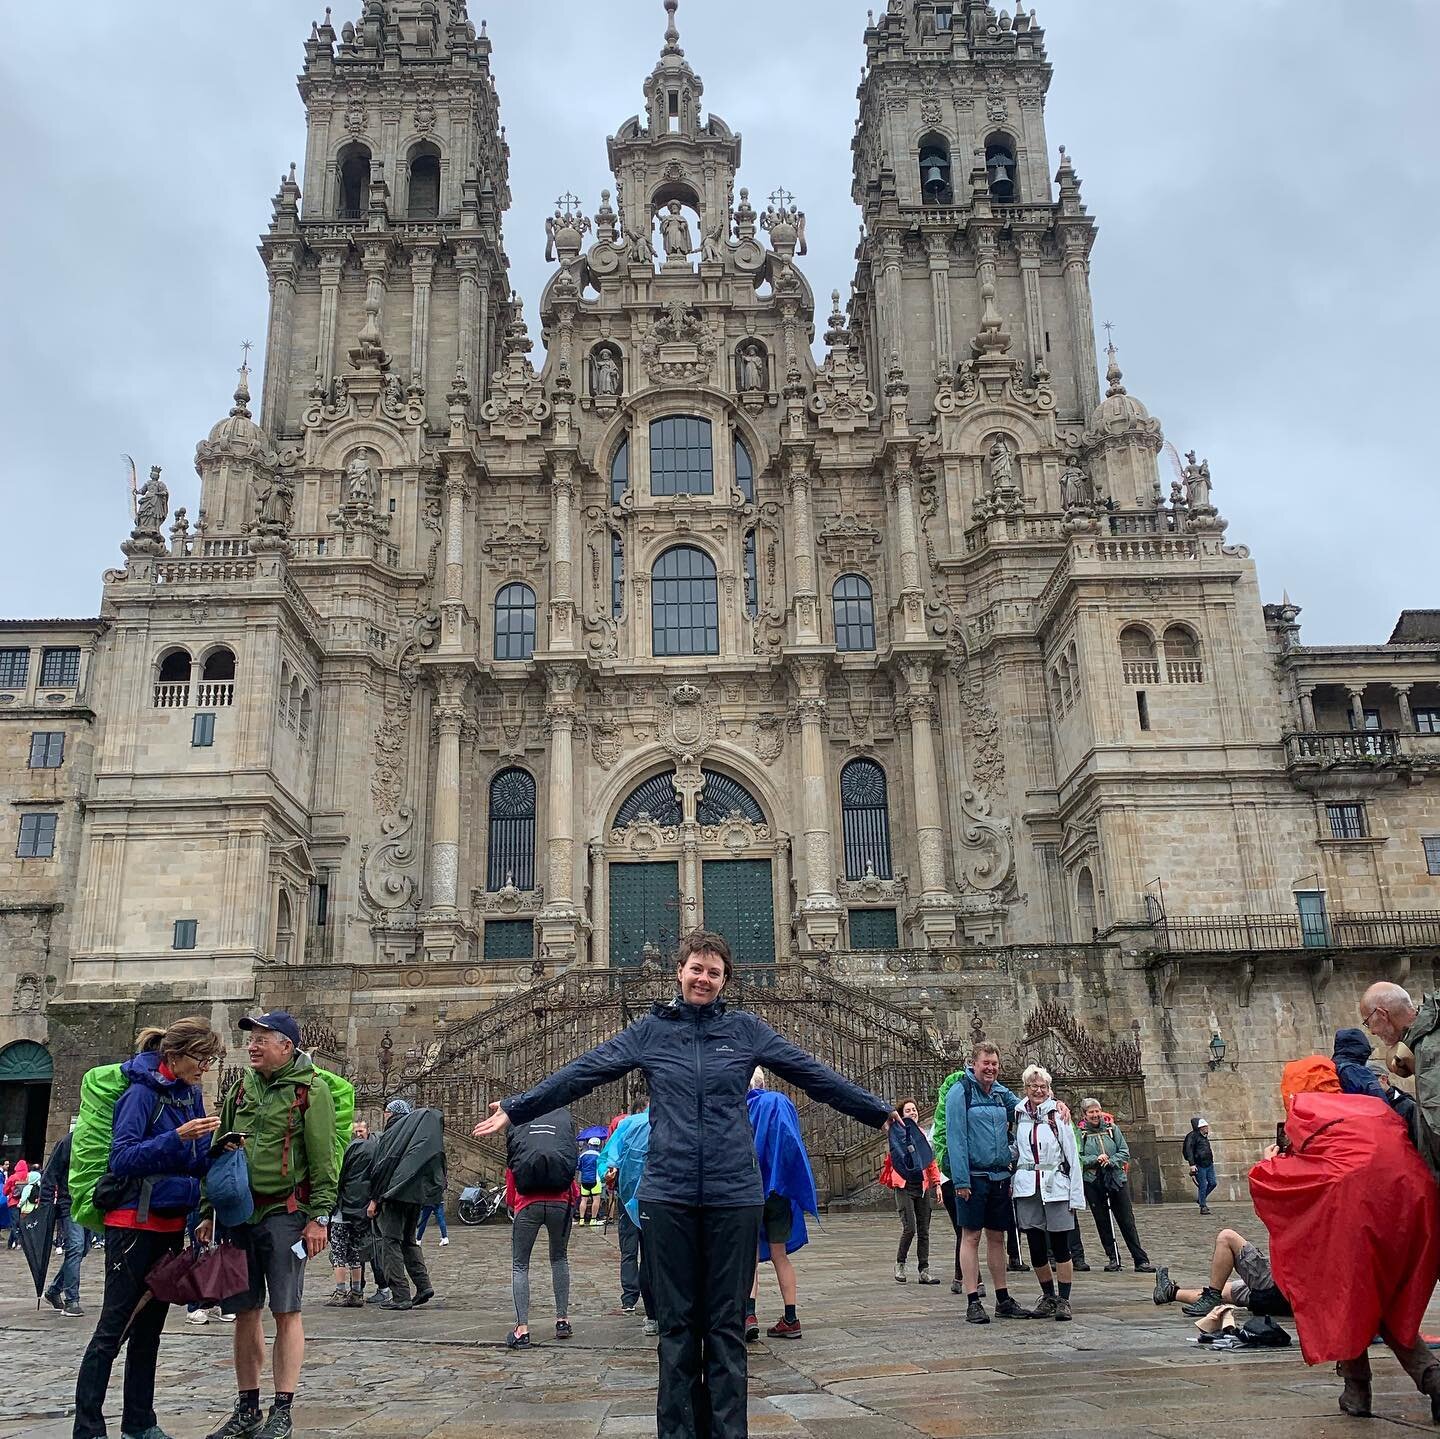 Santiago! I arrived at the end-point of the Camino Frances two days ago on a cold and rainy morning. It&rsquo;s taken time for my thoughts, emotions and prayers to catch up with me and I am grateful to have had several days in the city to go through 